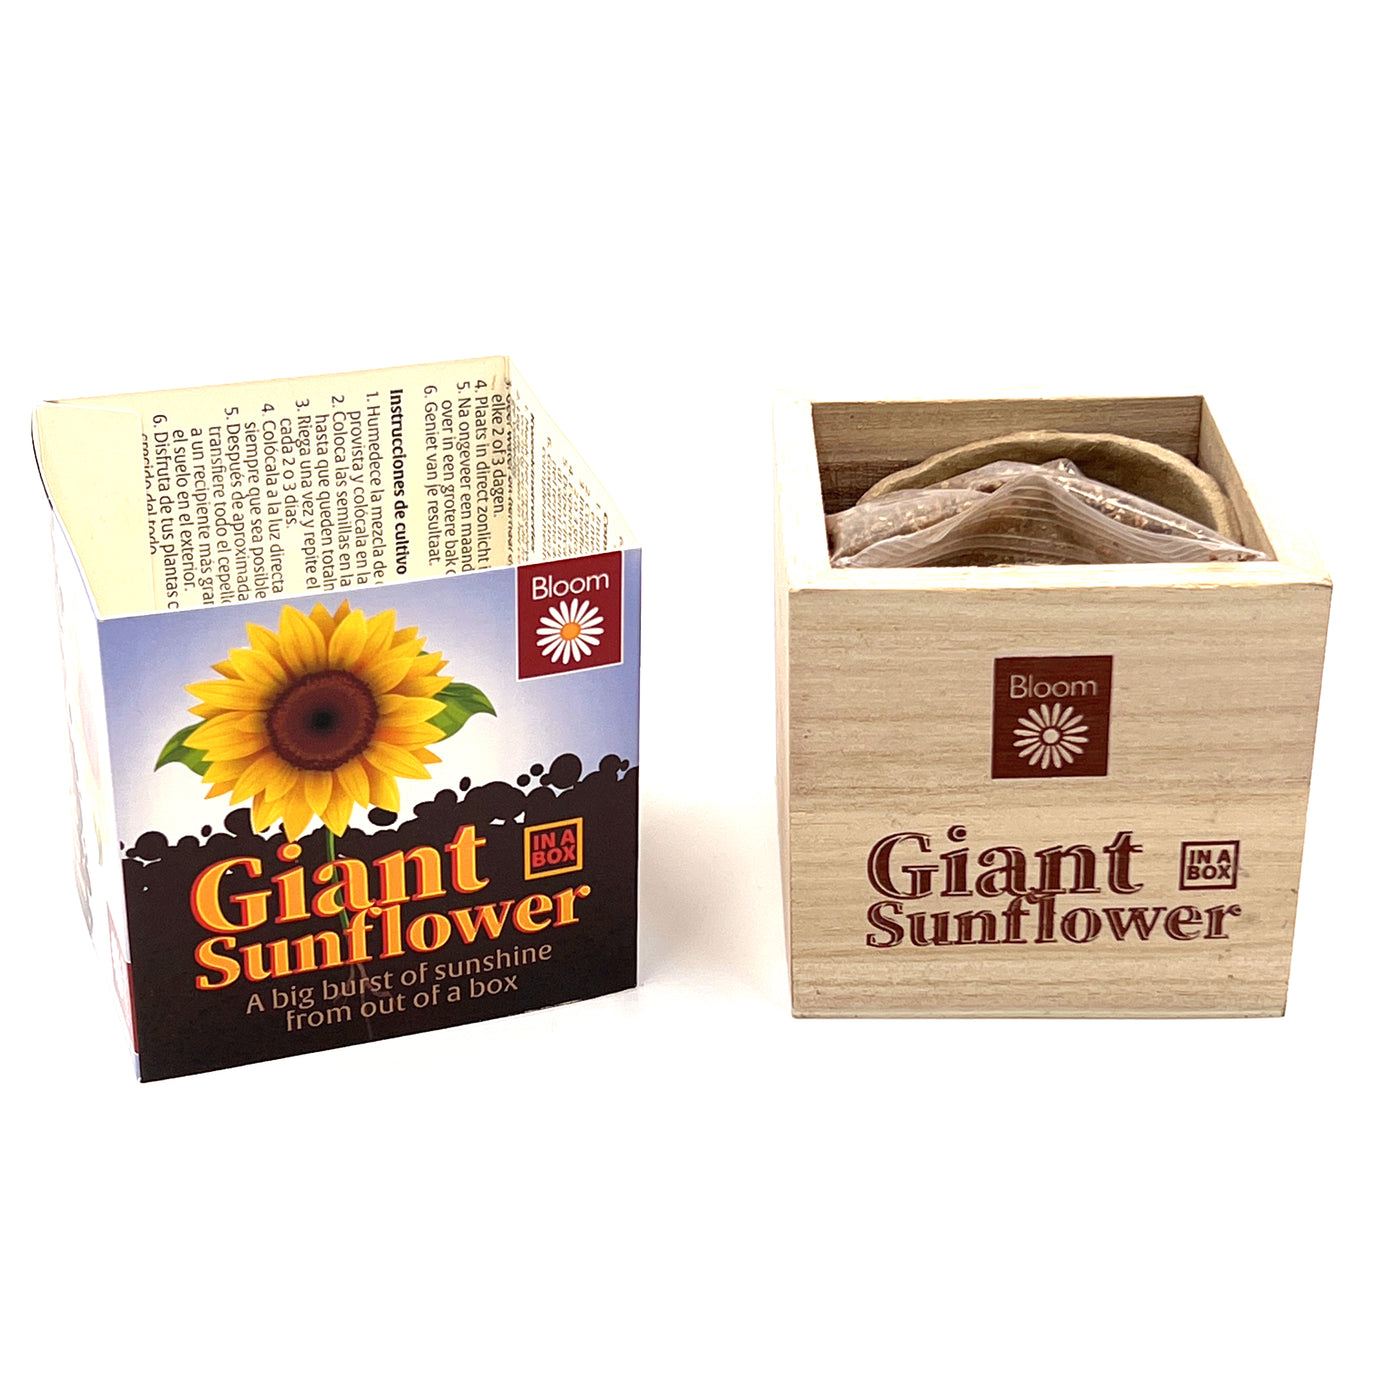 Grow your Own Giant Sunflower in a box